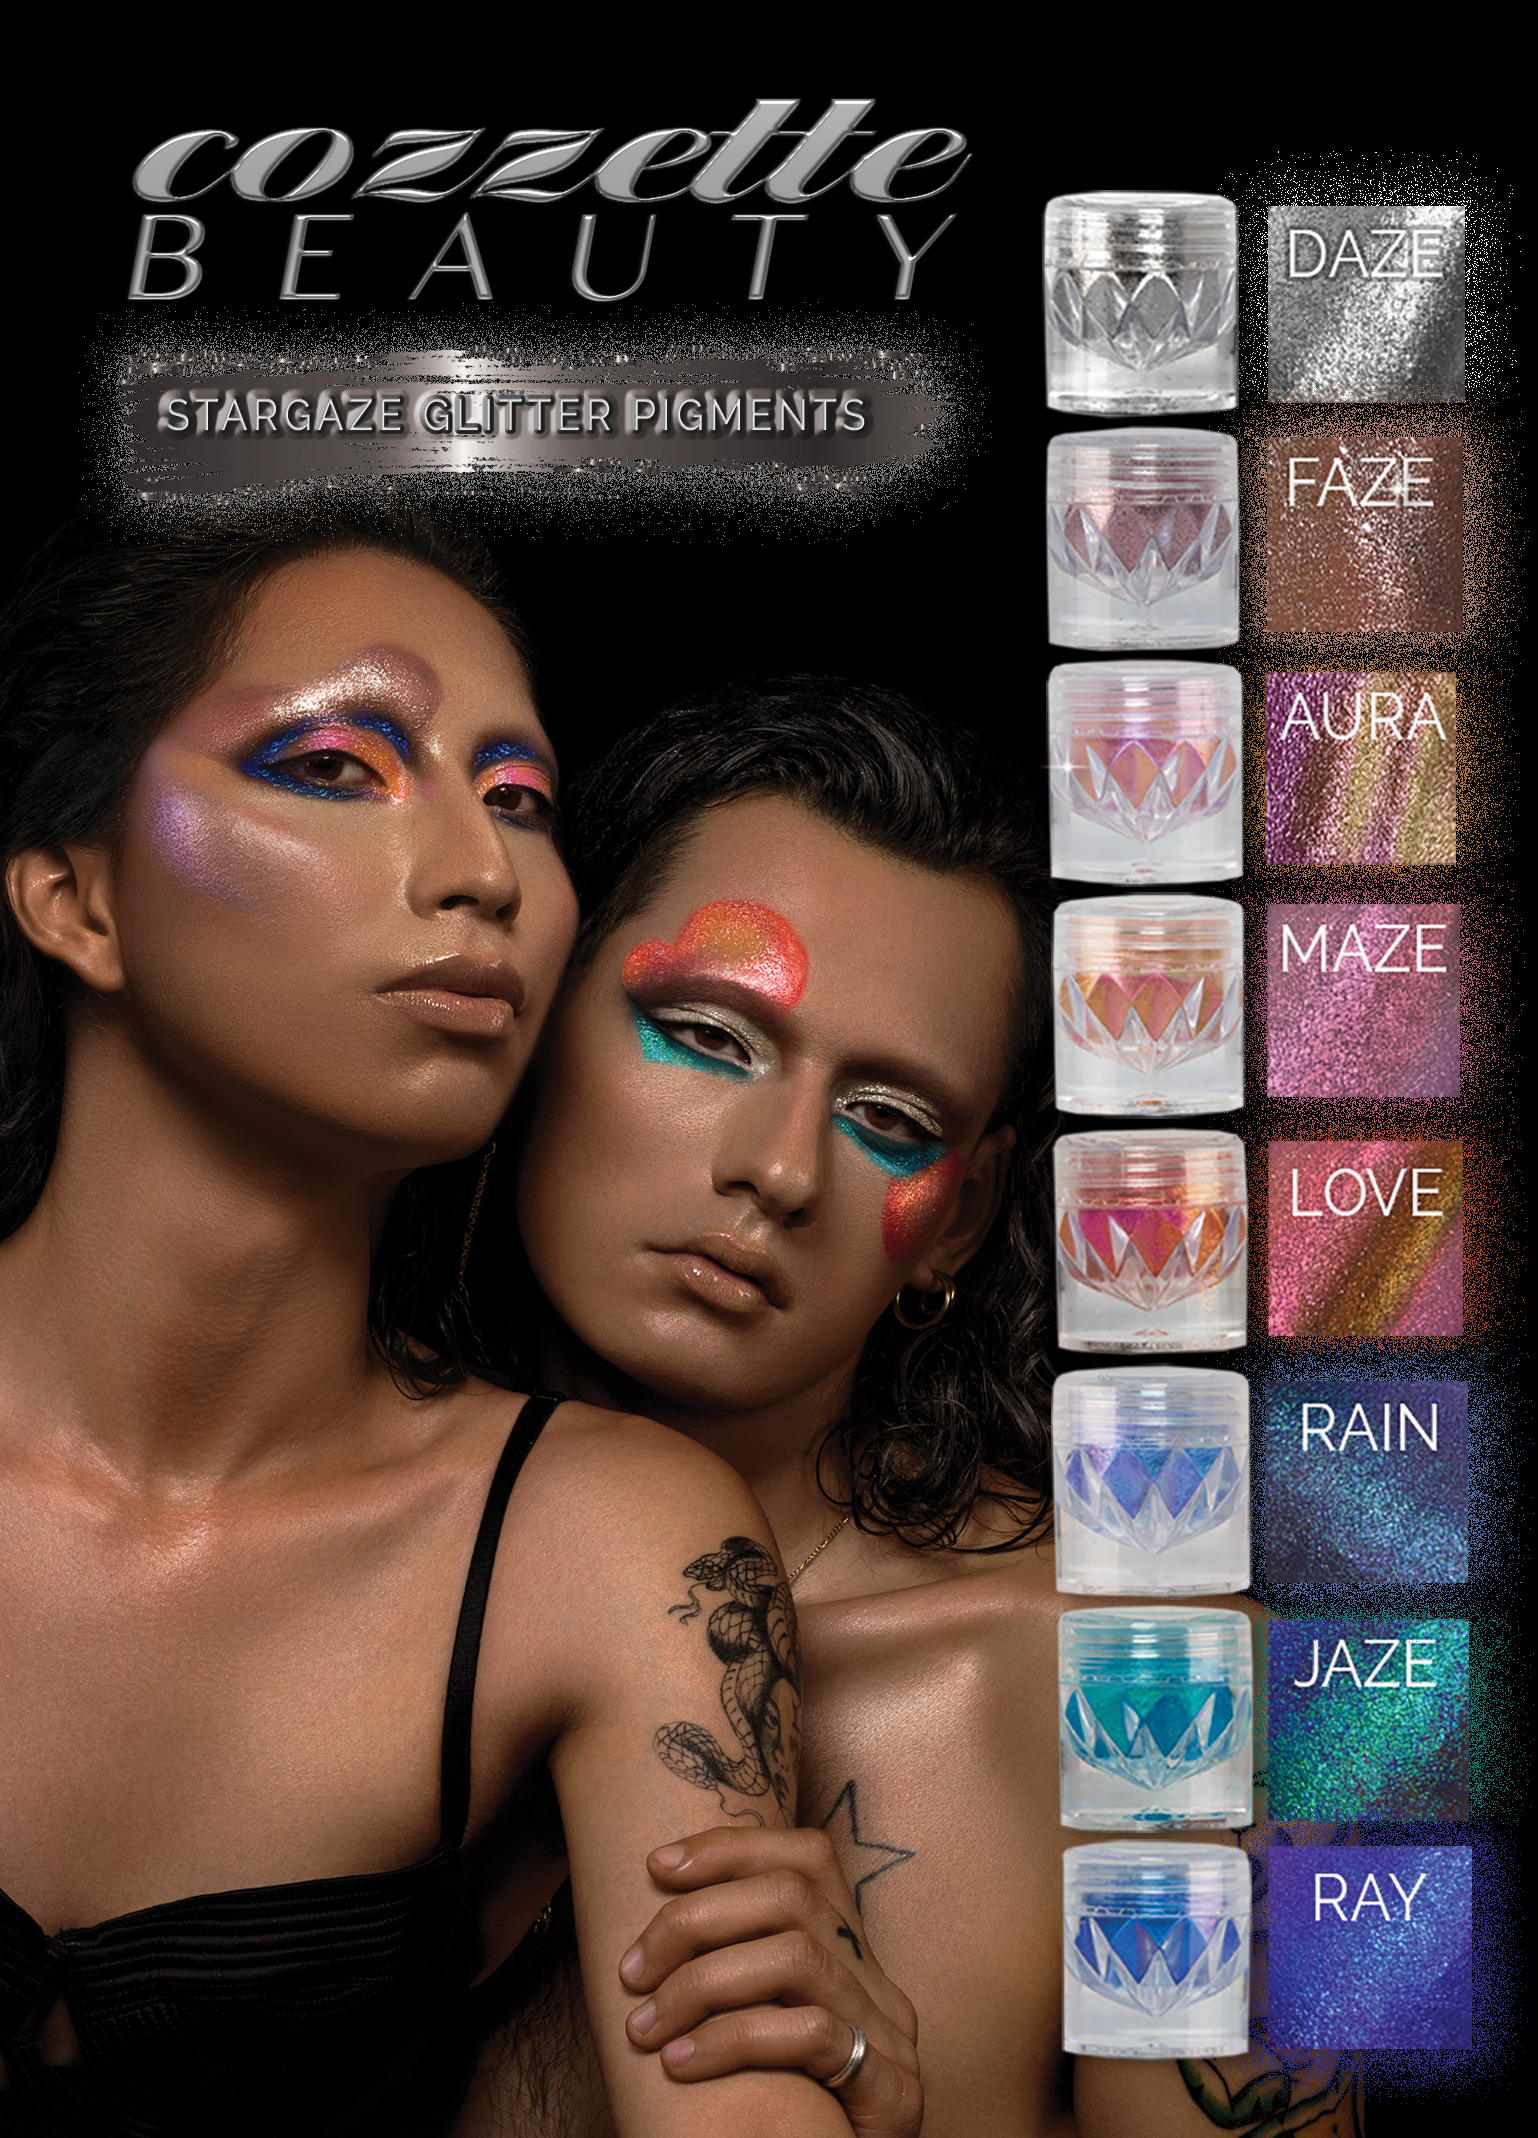 Introducing Stargaze Glitter Pigments: Cozzette Beauty's Dazzling New Addition to Makeup Artistry